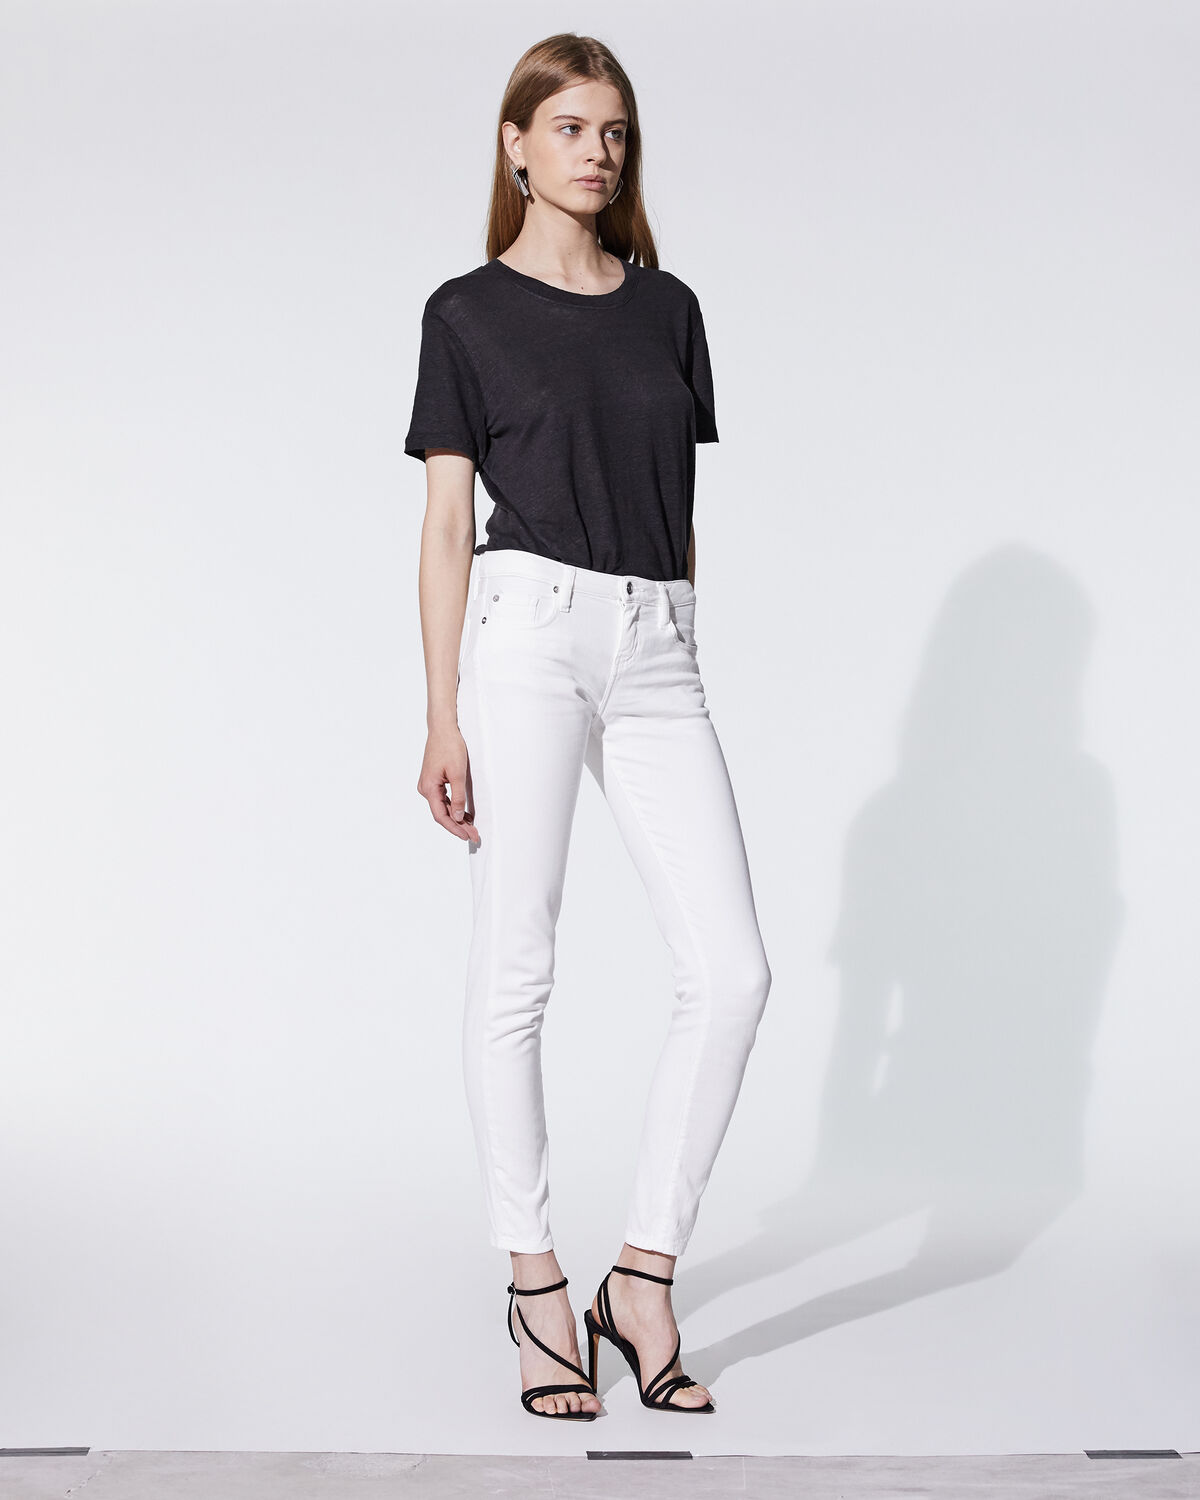 Photo of IRO Paris Jarodcla Jeans White - These White Denim Skinny Jeans Will Perfectly Match Your Curves. These Classic Jeans Can Match Perfectly With Your Day And Evening Outfits. Winter 18